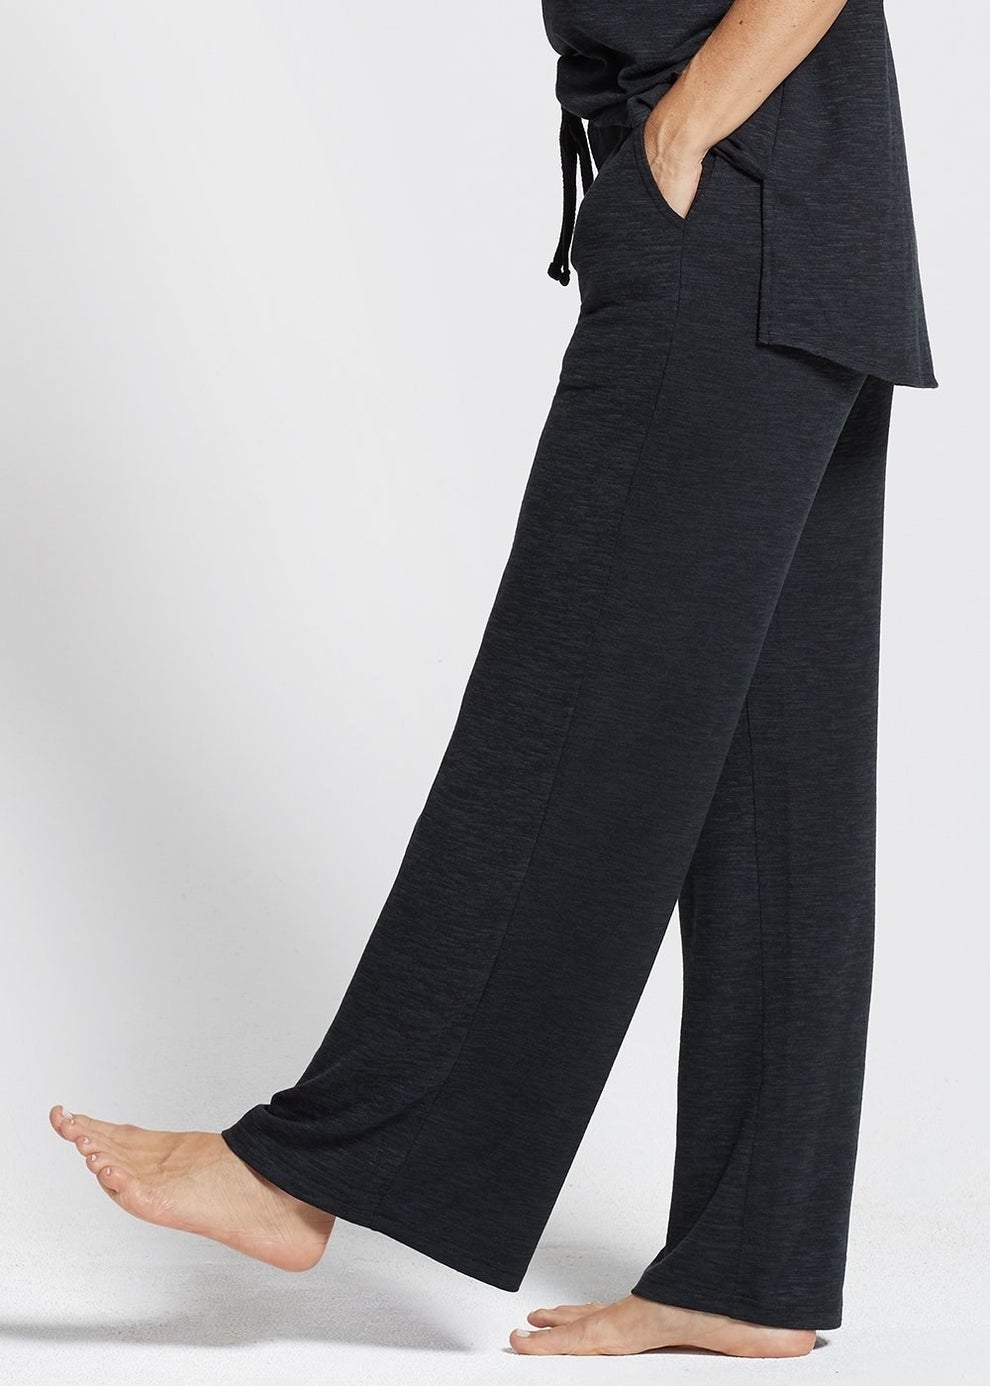 31 Stretchy Pants That'll Make You Do A Happy Dance